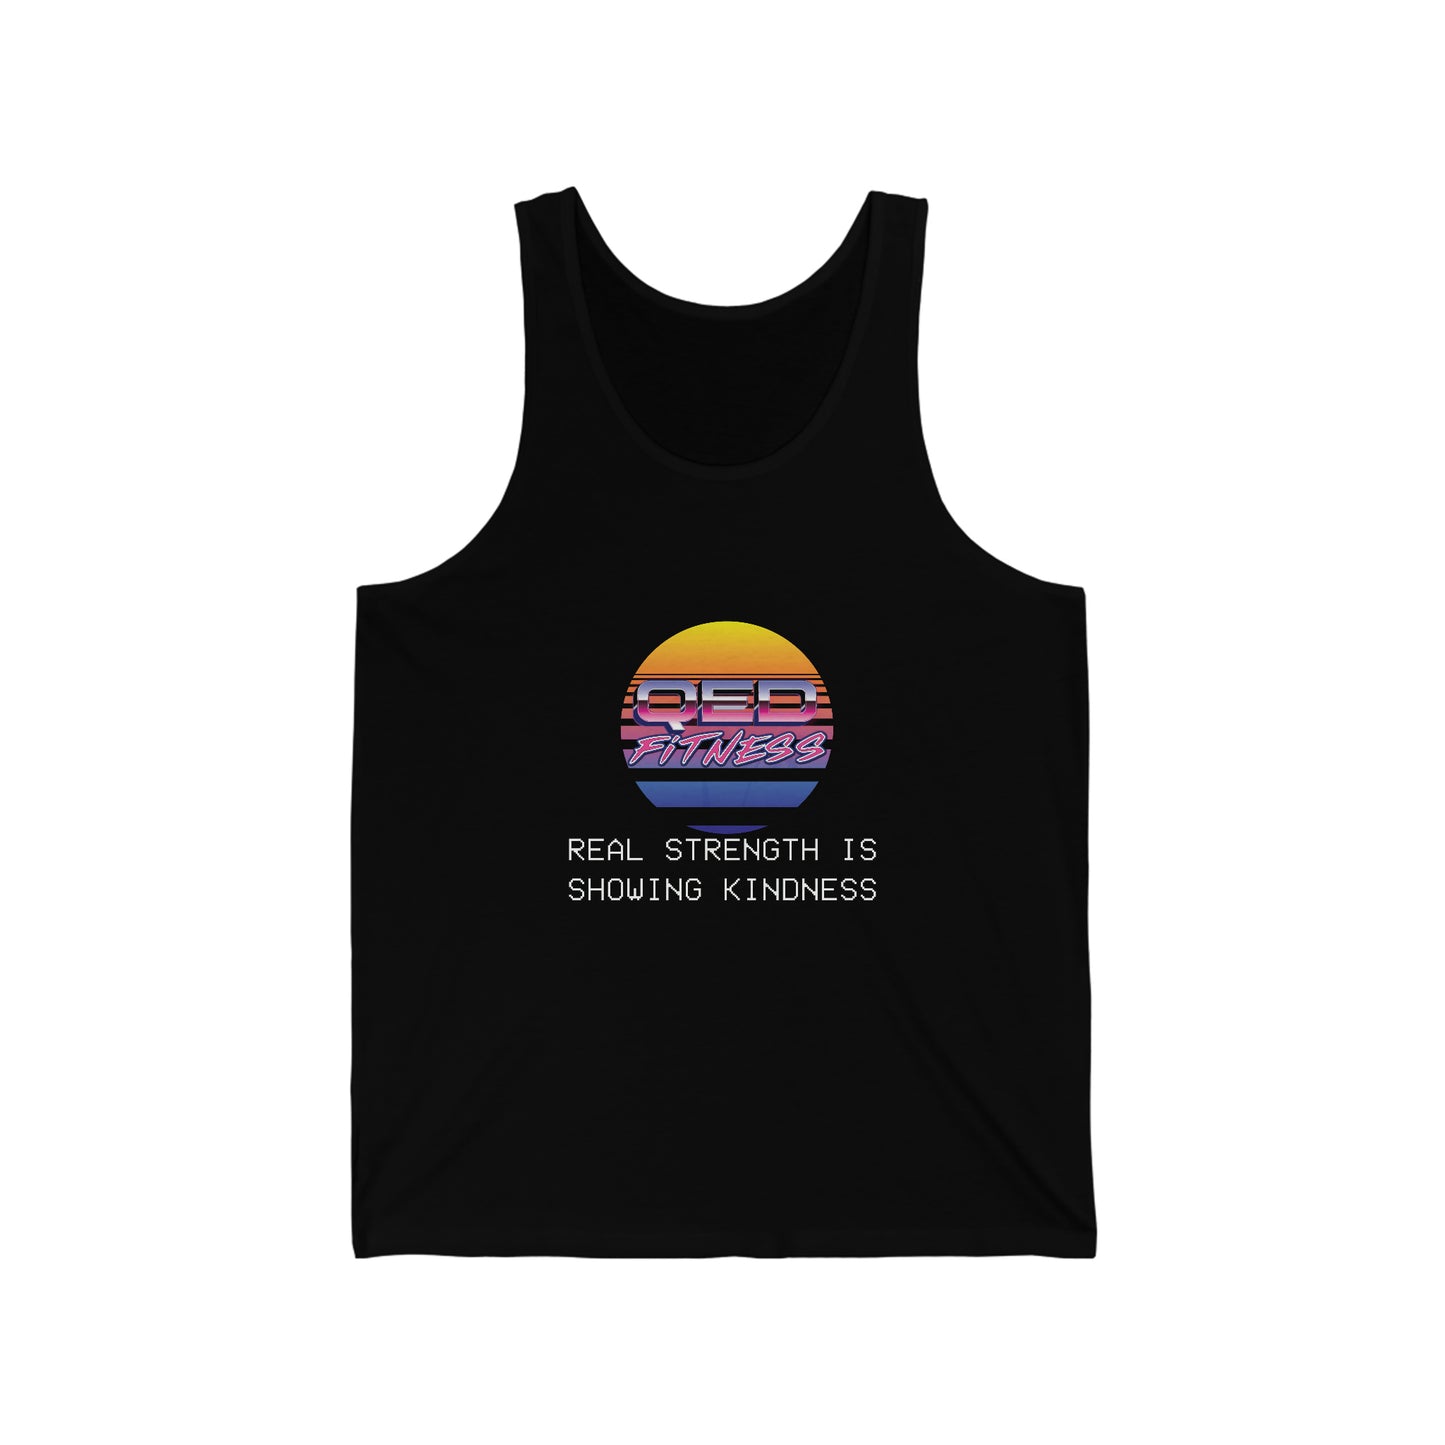 Real Strength is Showing Kindness Unisex Tank Top